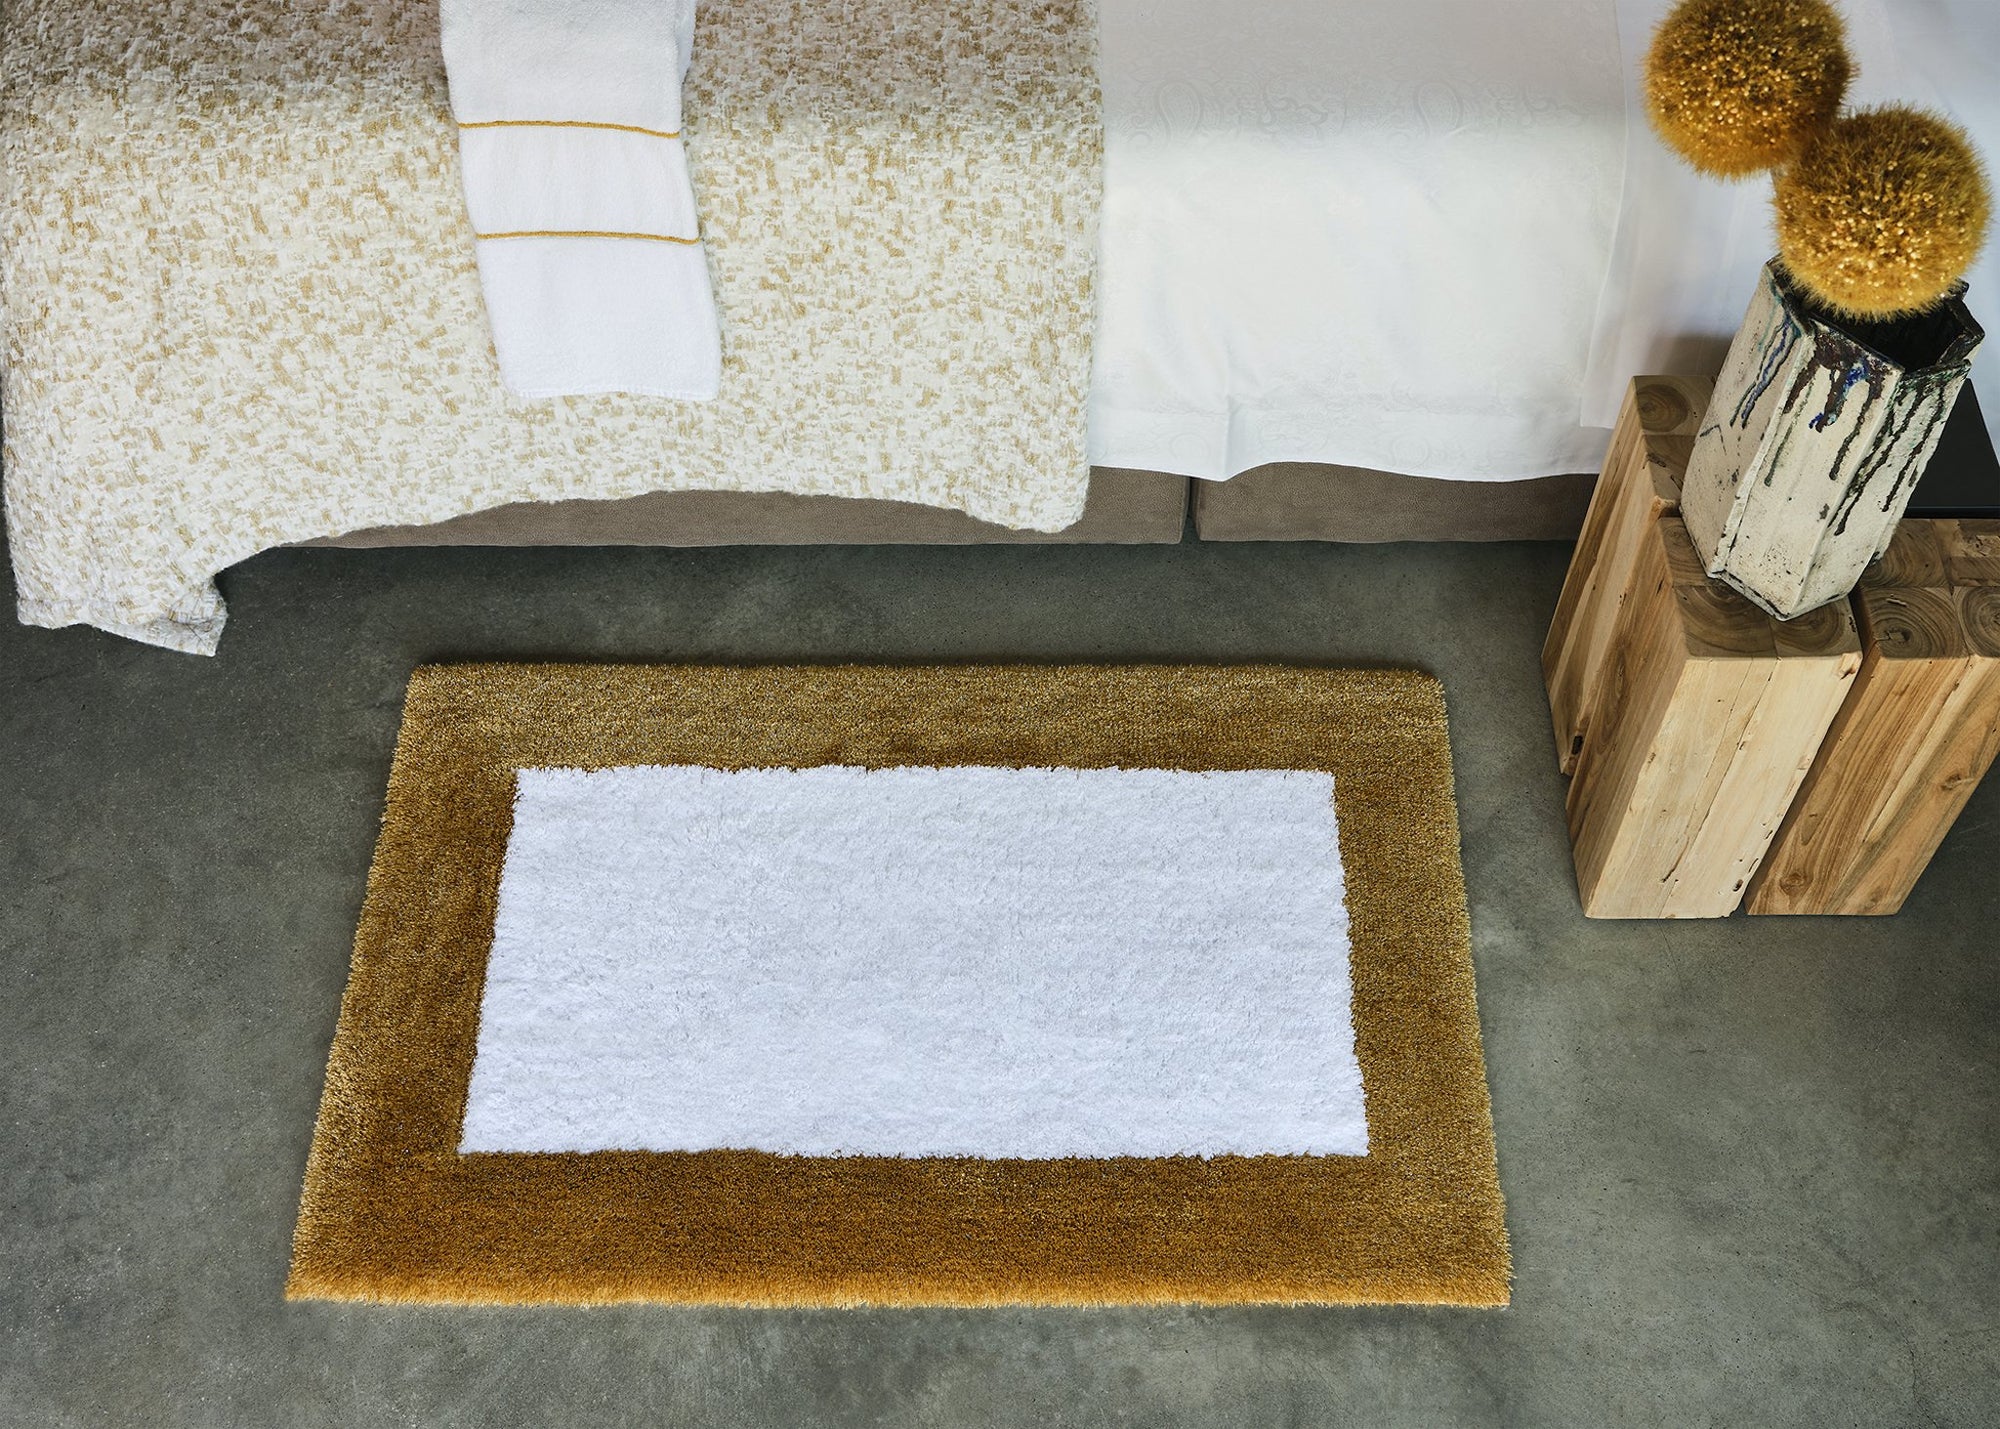 Fig Linens - Shiny White & Gold Bath Rug by Abyss & Habidecor - Lifestyle